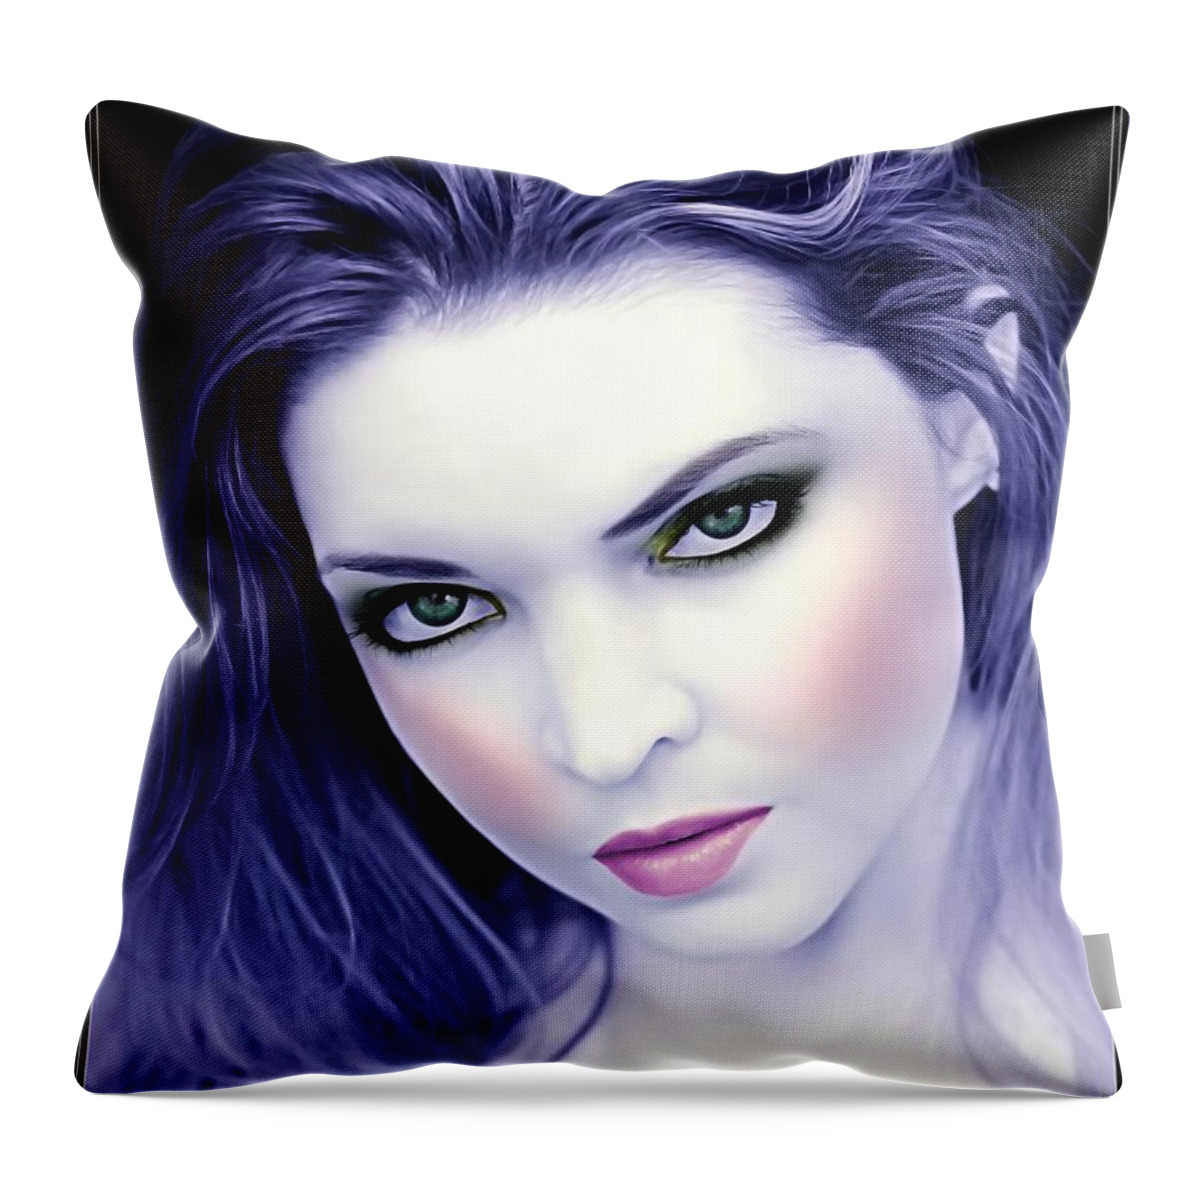 Irc Throw Pillow featuring the photograph Mysterious by Jon Volden